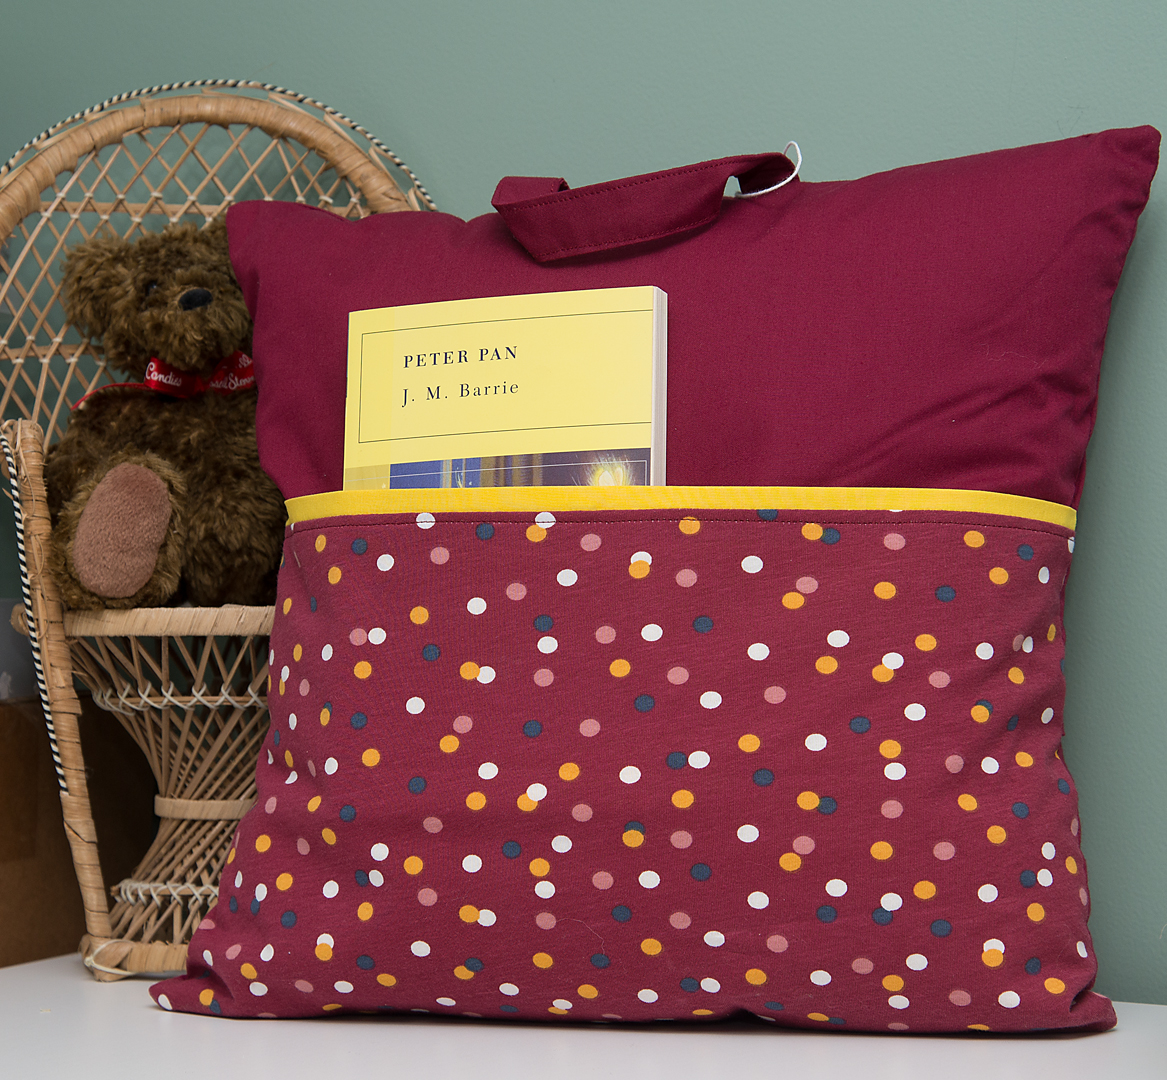 reading pillow for kids with a front pocket